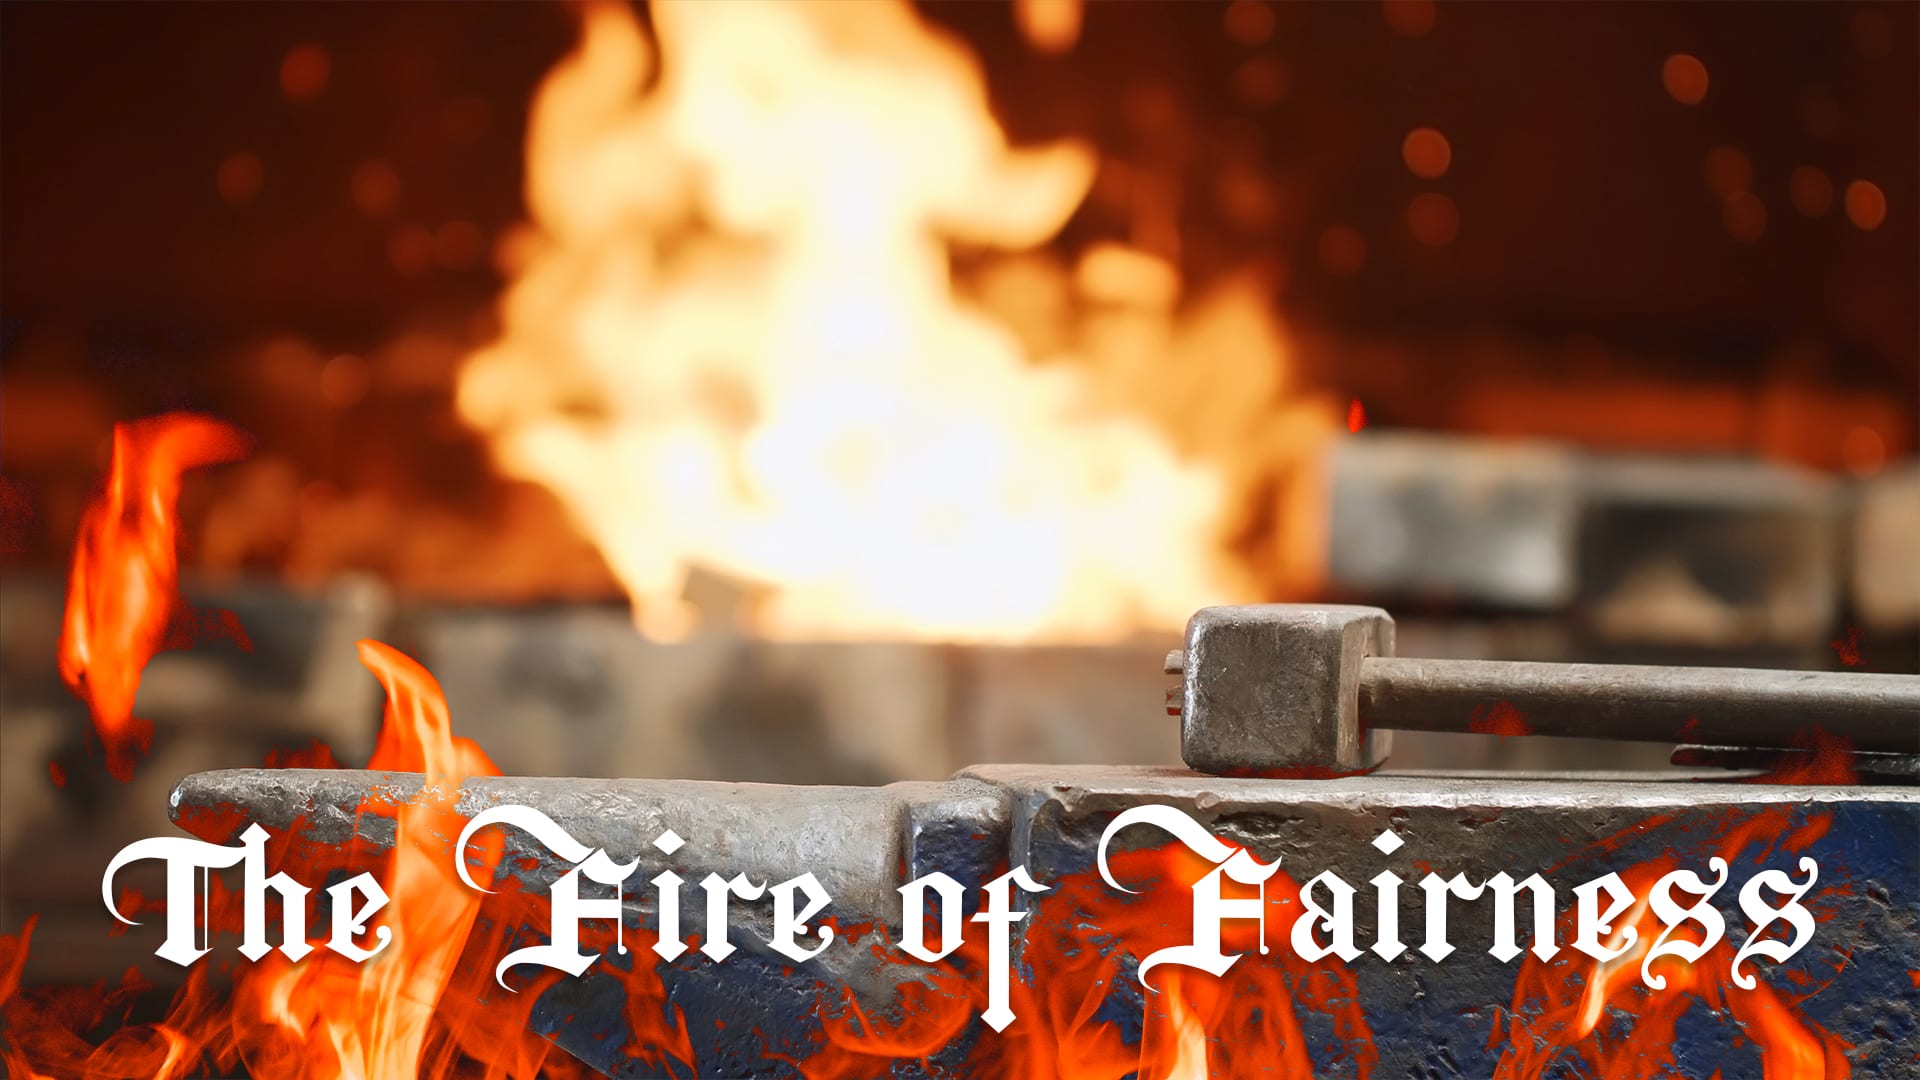 The Fire of Fairness Title